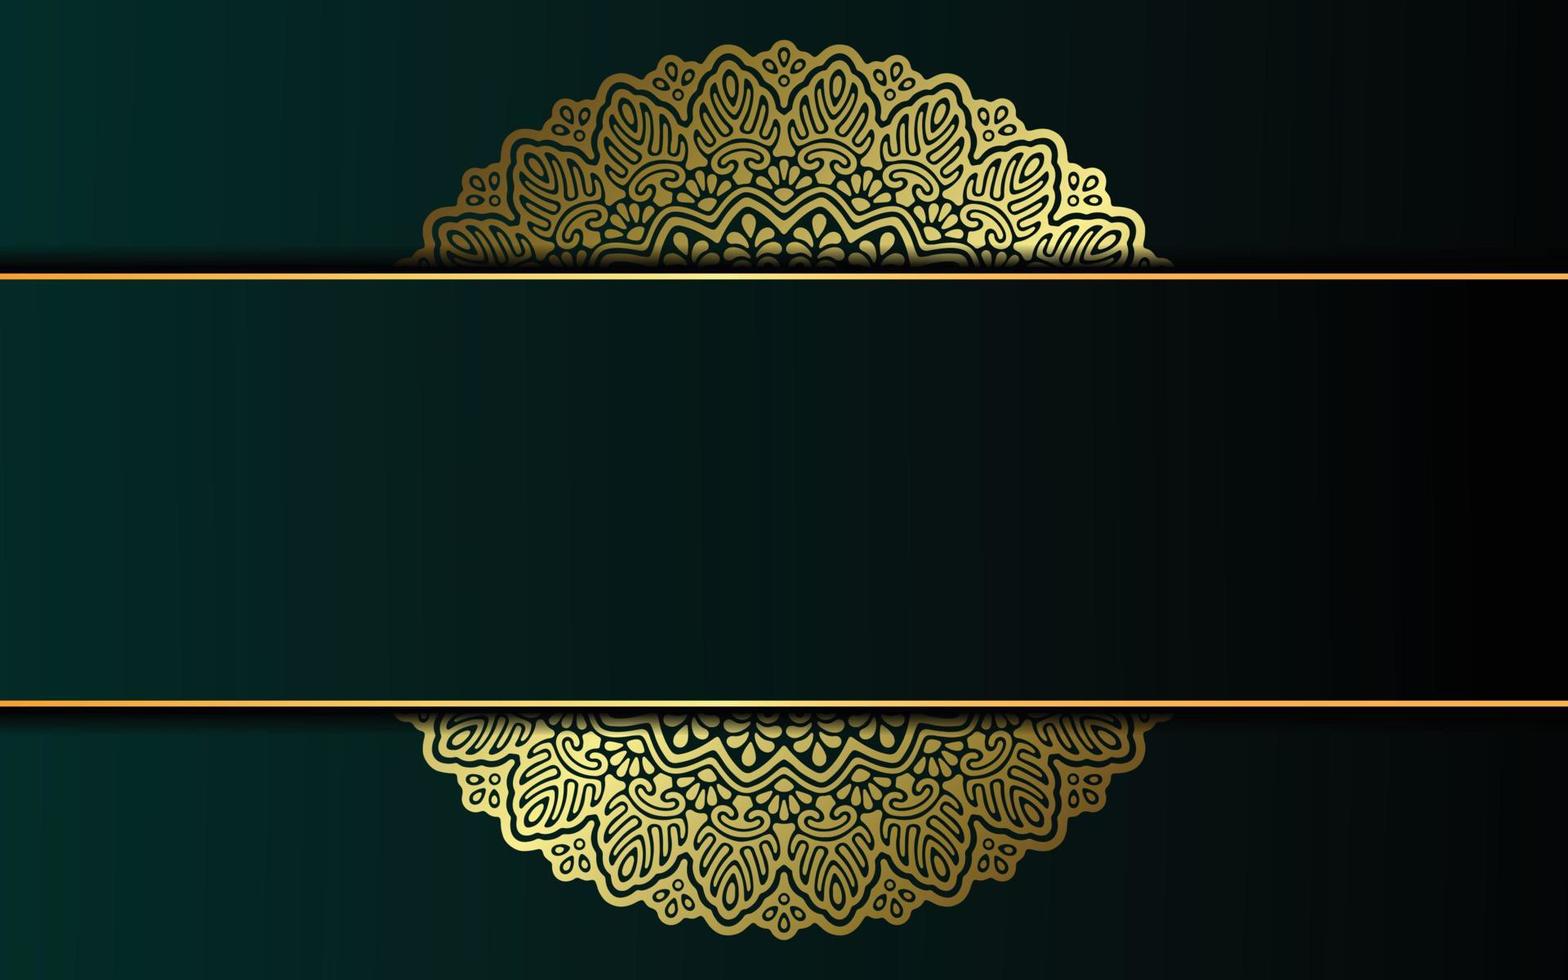 Mandala template with elegant, classic elements. Great for invitation, flyer, menu, brochure, background vector